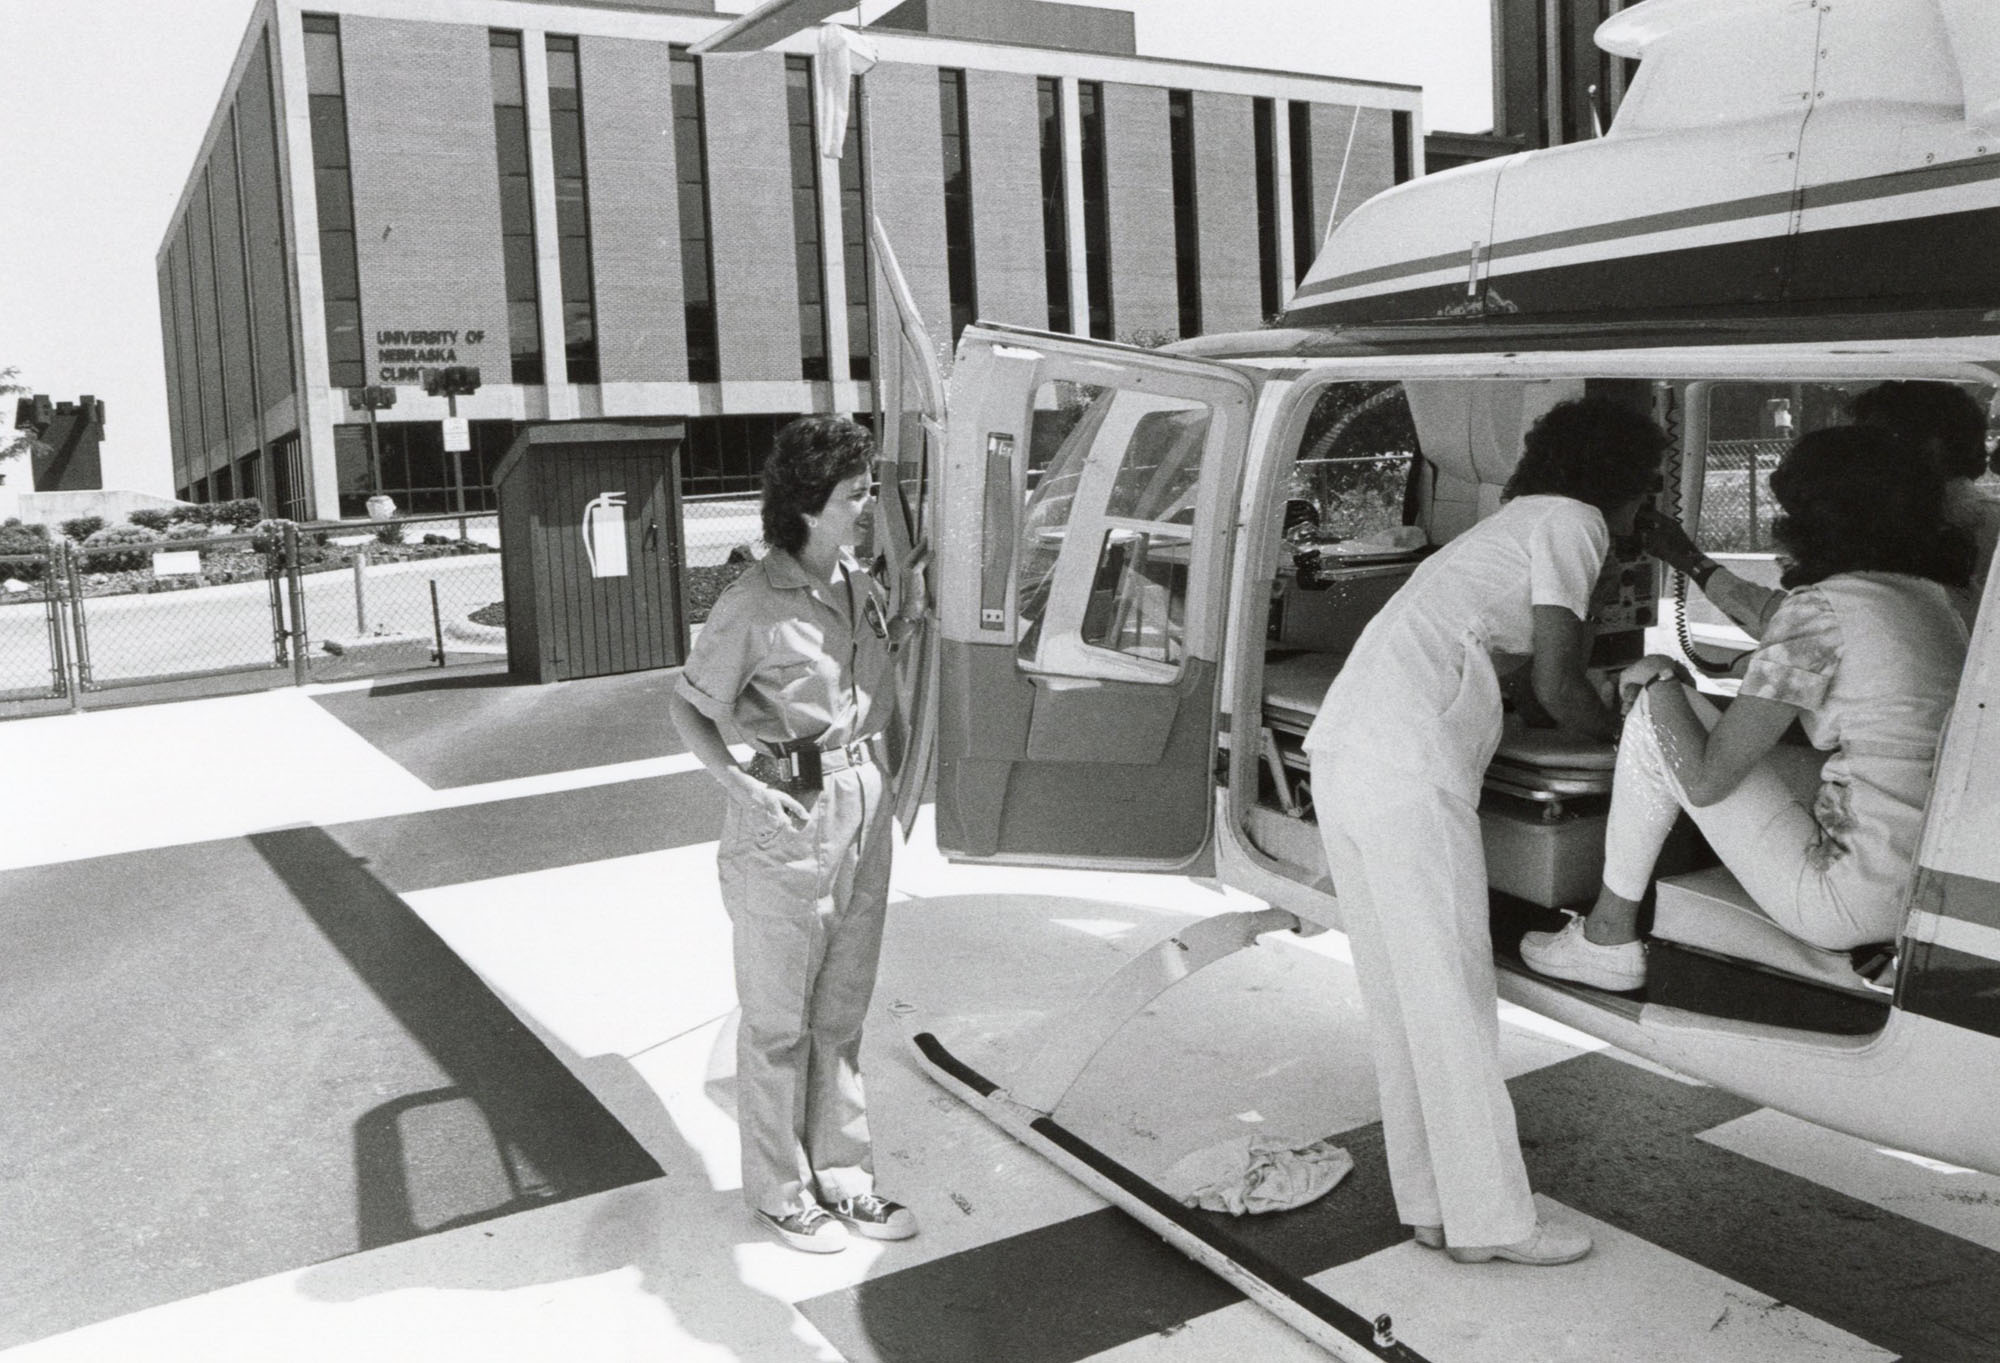 UNMC joined SkyMed in 1981&period; It was based at the campus&comma; with a helipad at 44th and Dewey Streets&comma; by January 1982&period;